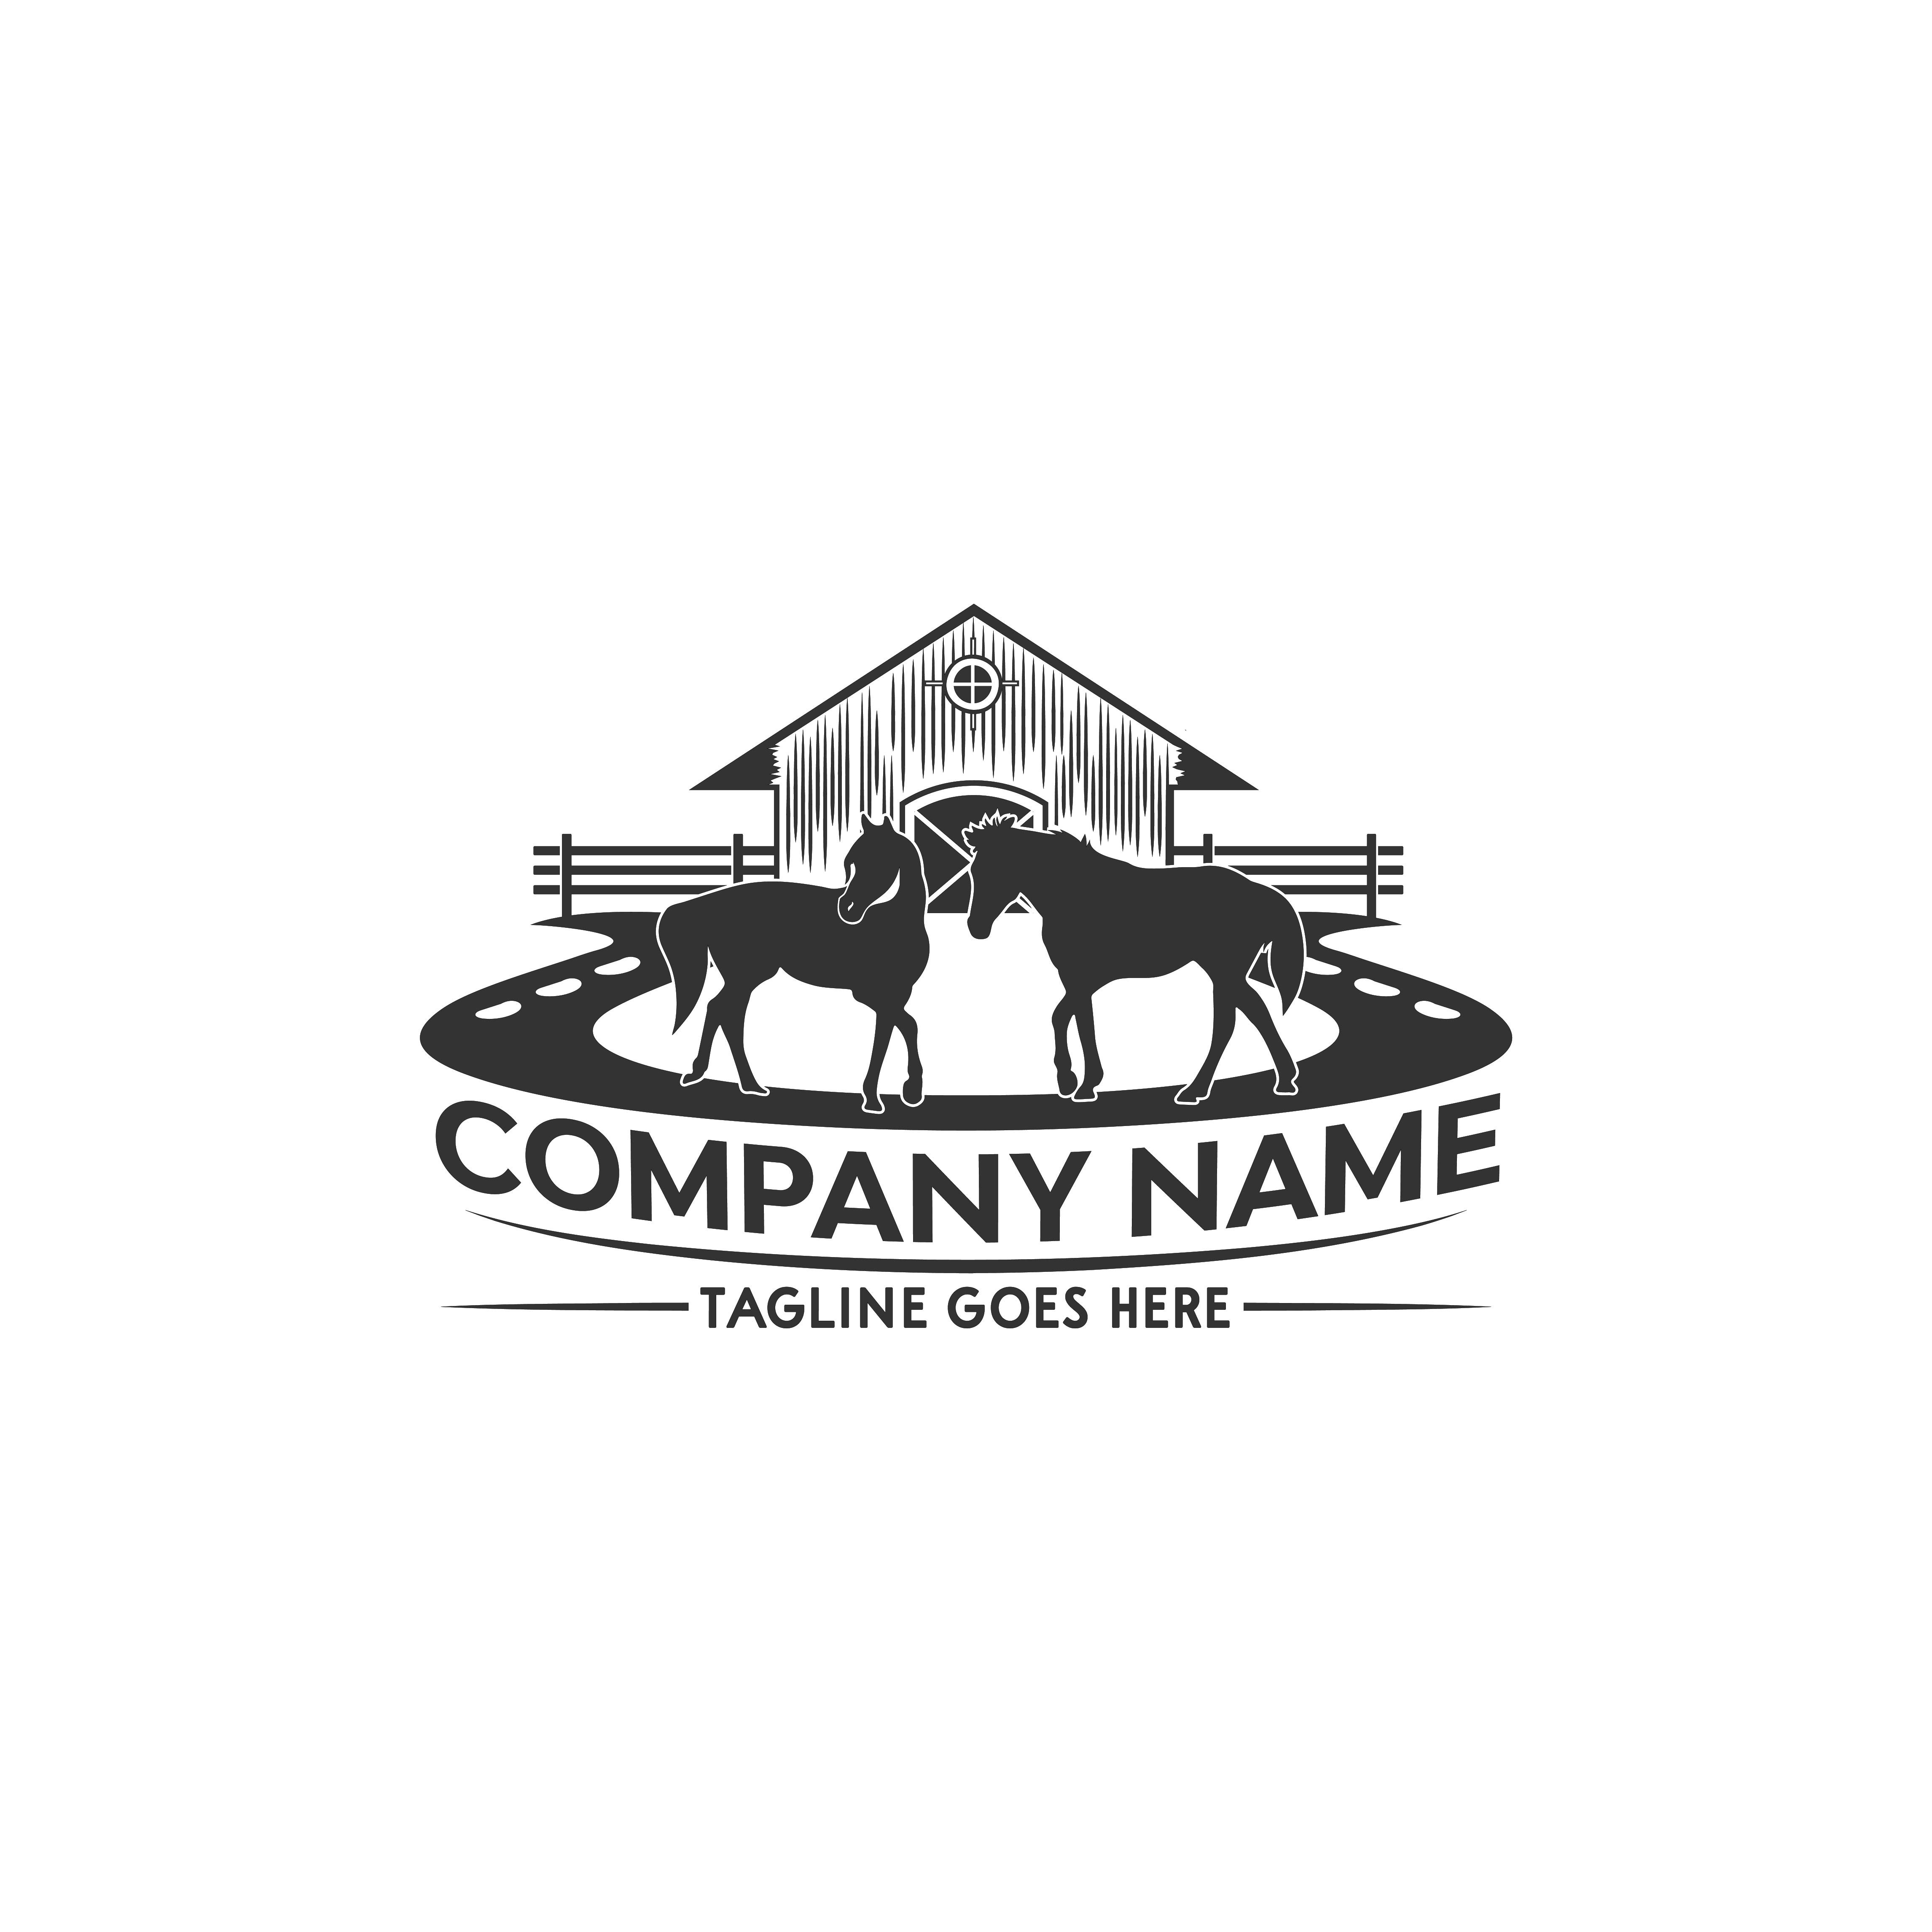 Horse Farm logo for horse Related business purpose preview image.